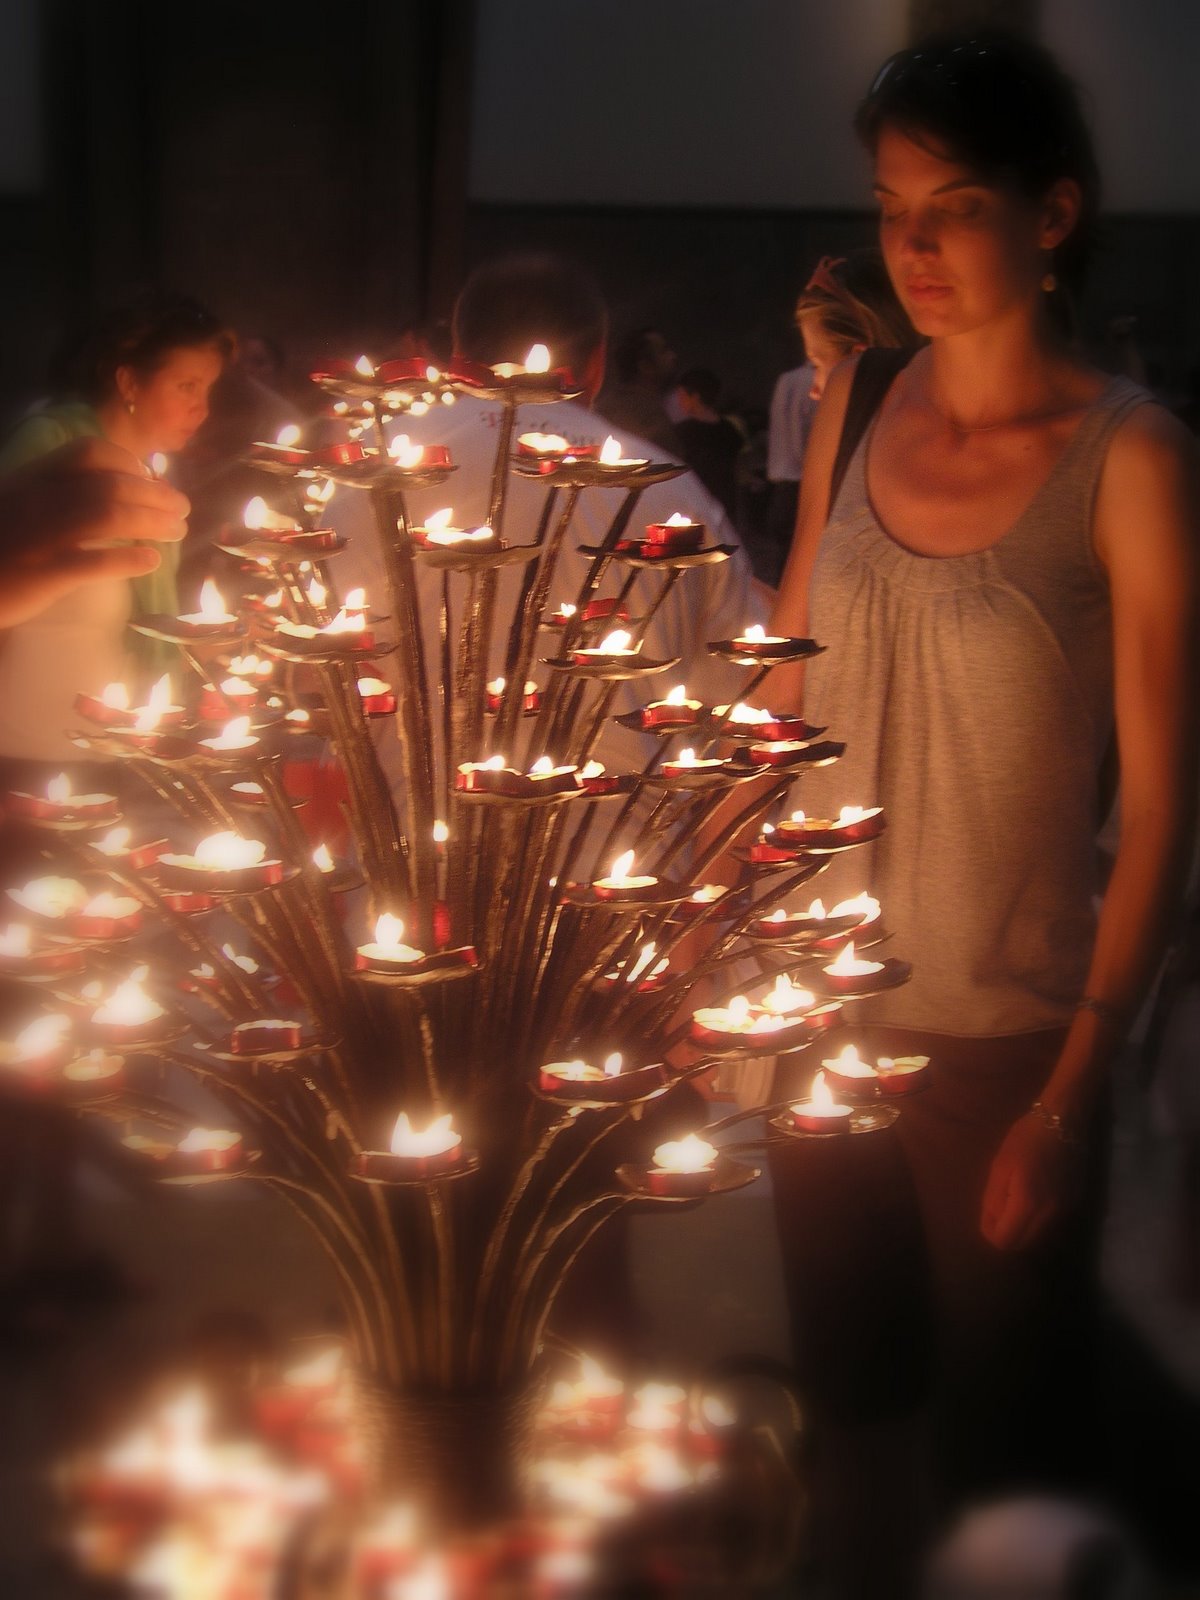 [Jen+&+Cathedral+Candles.jpg]